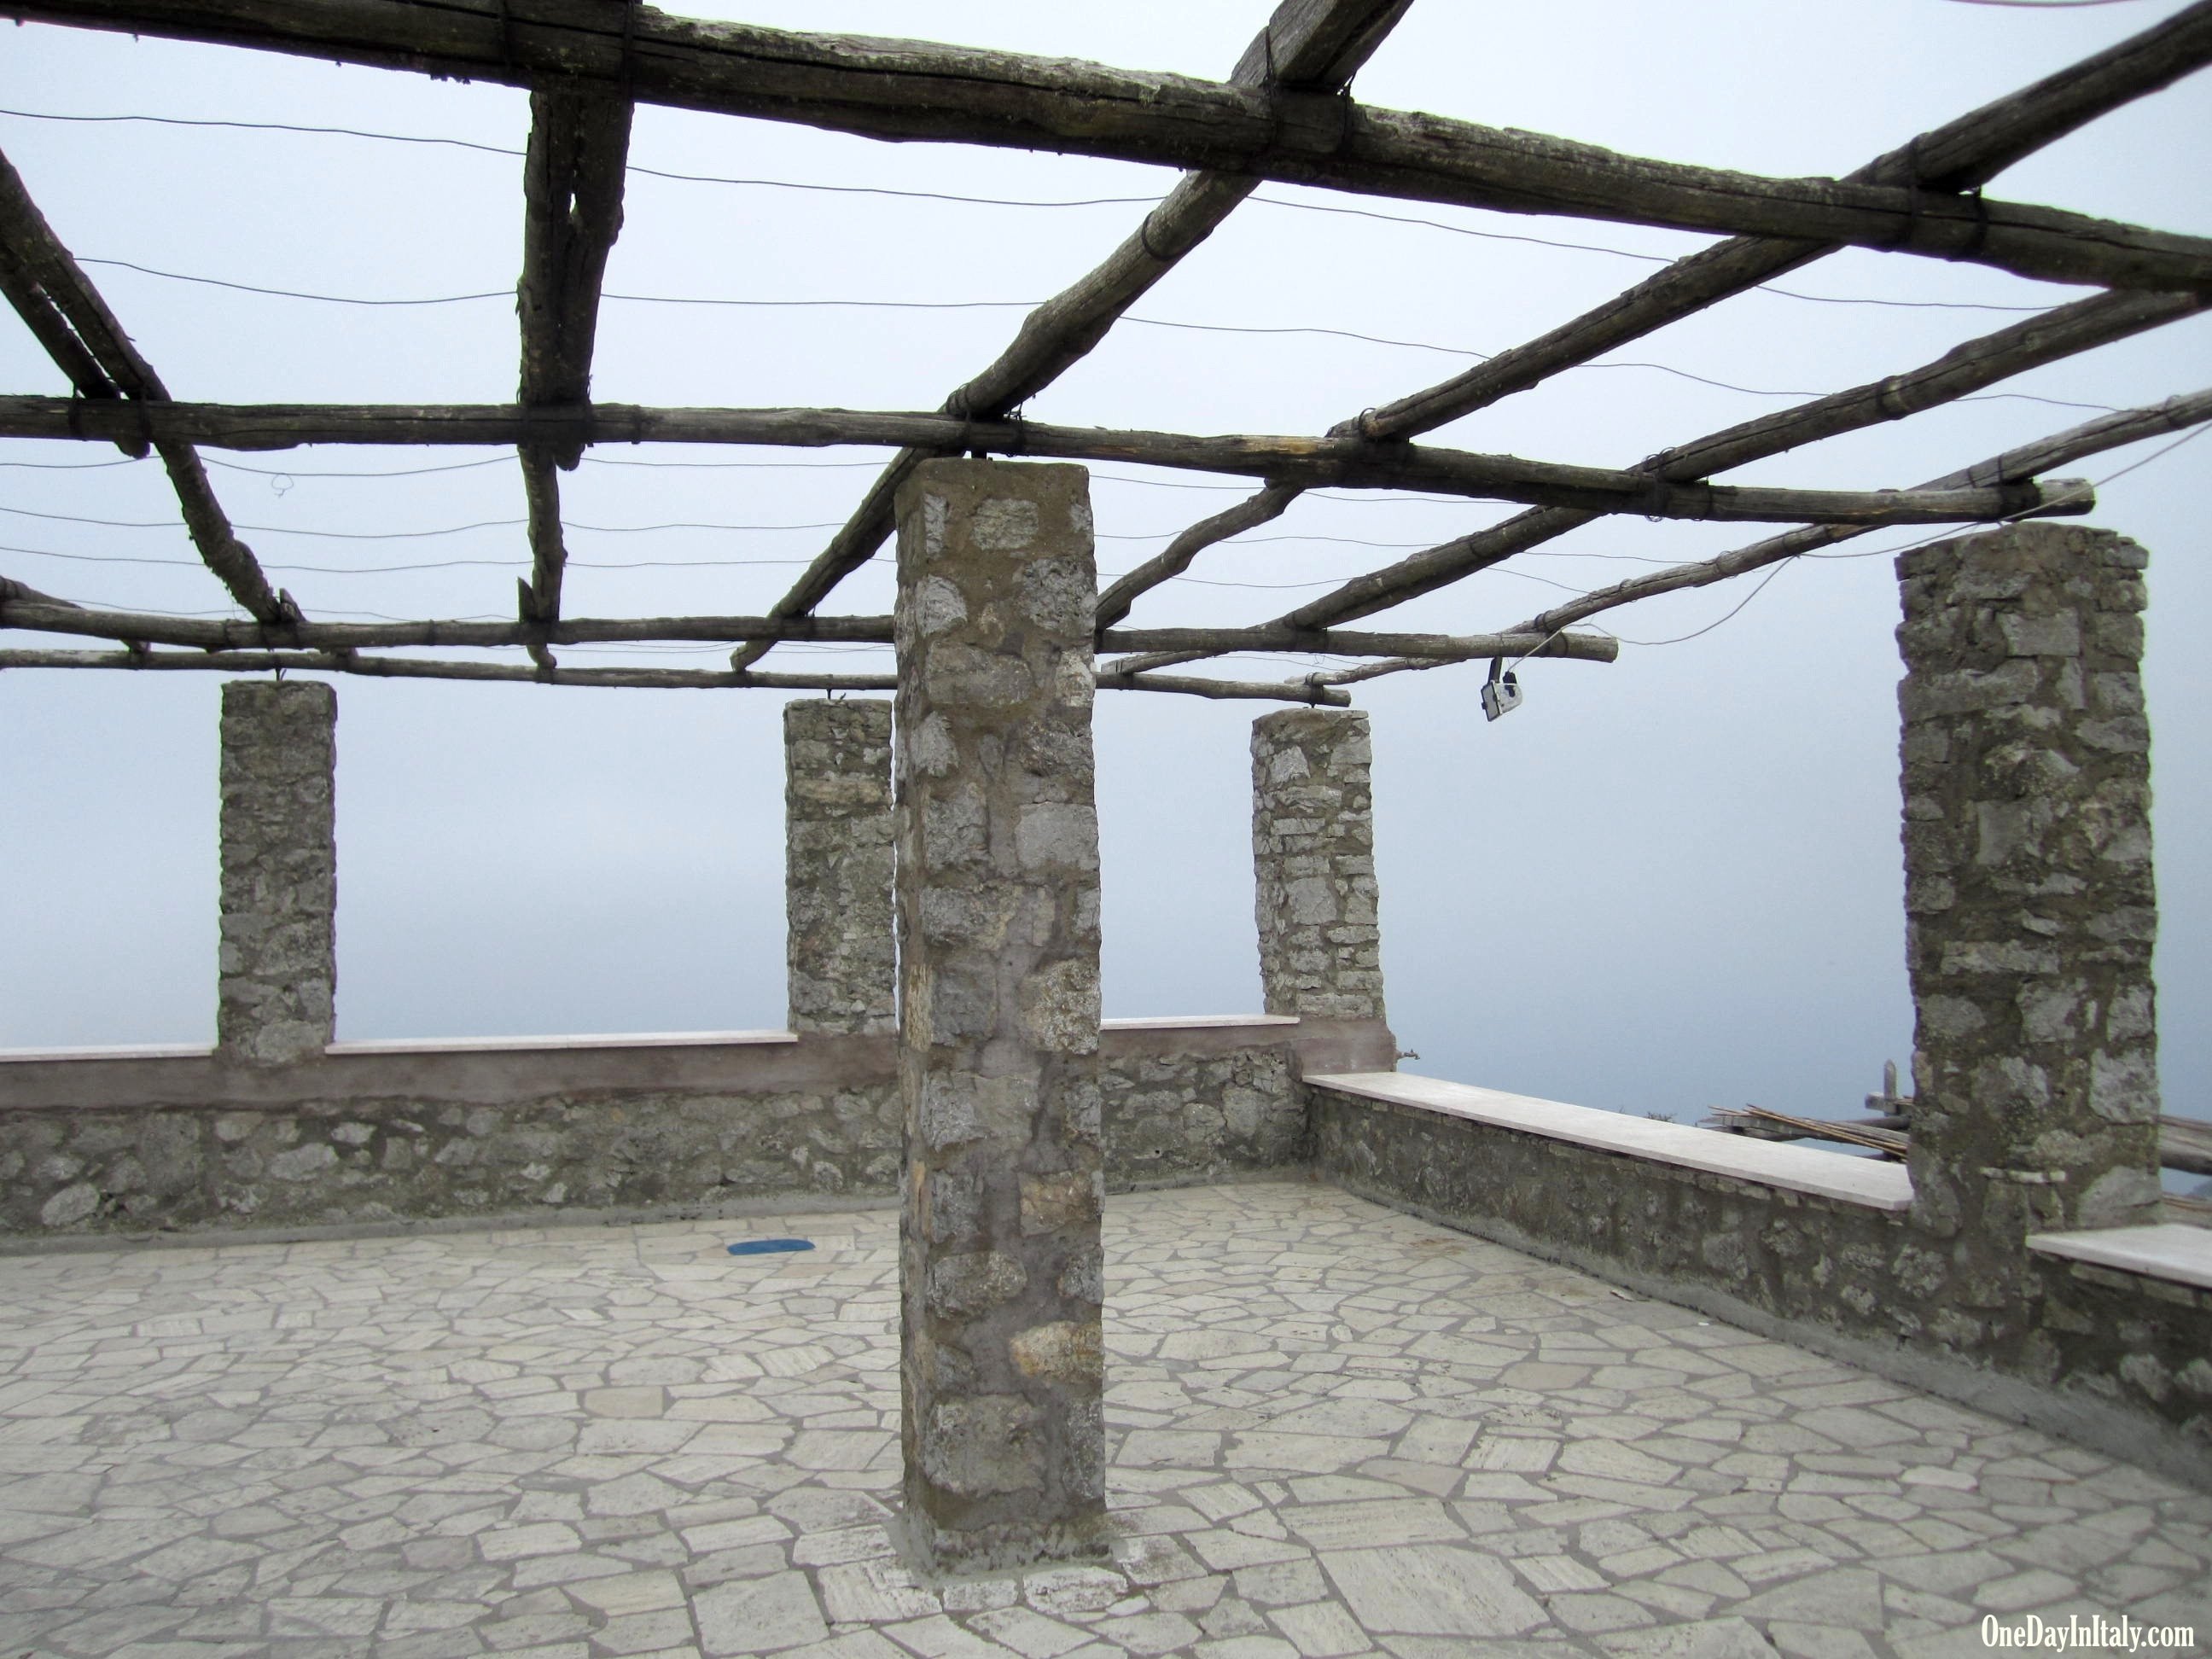 Chairlift station on top of Mt. Solaro, Isle of Capri